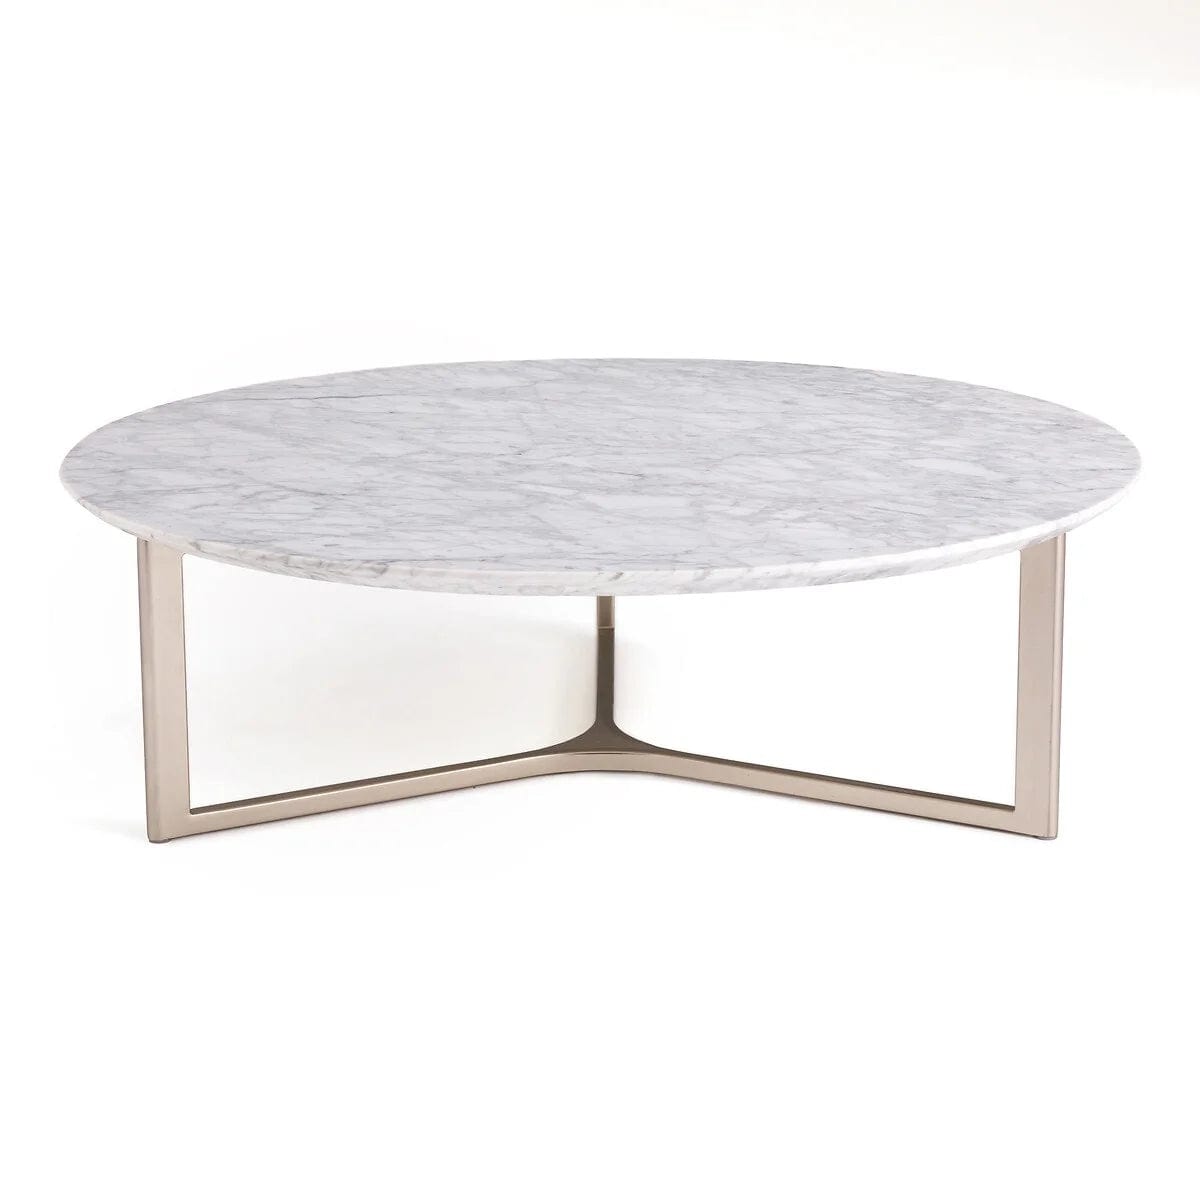 Table basse ronde italienne